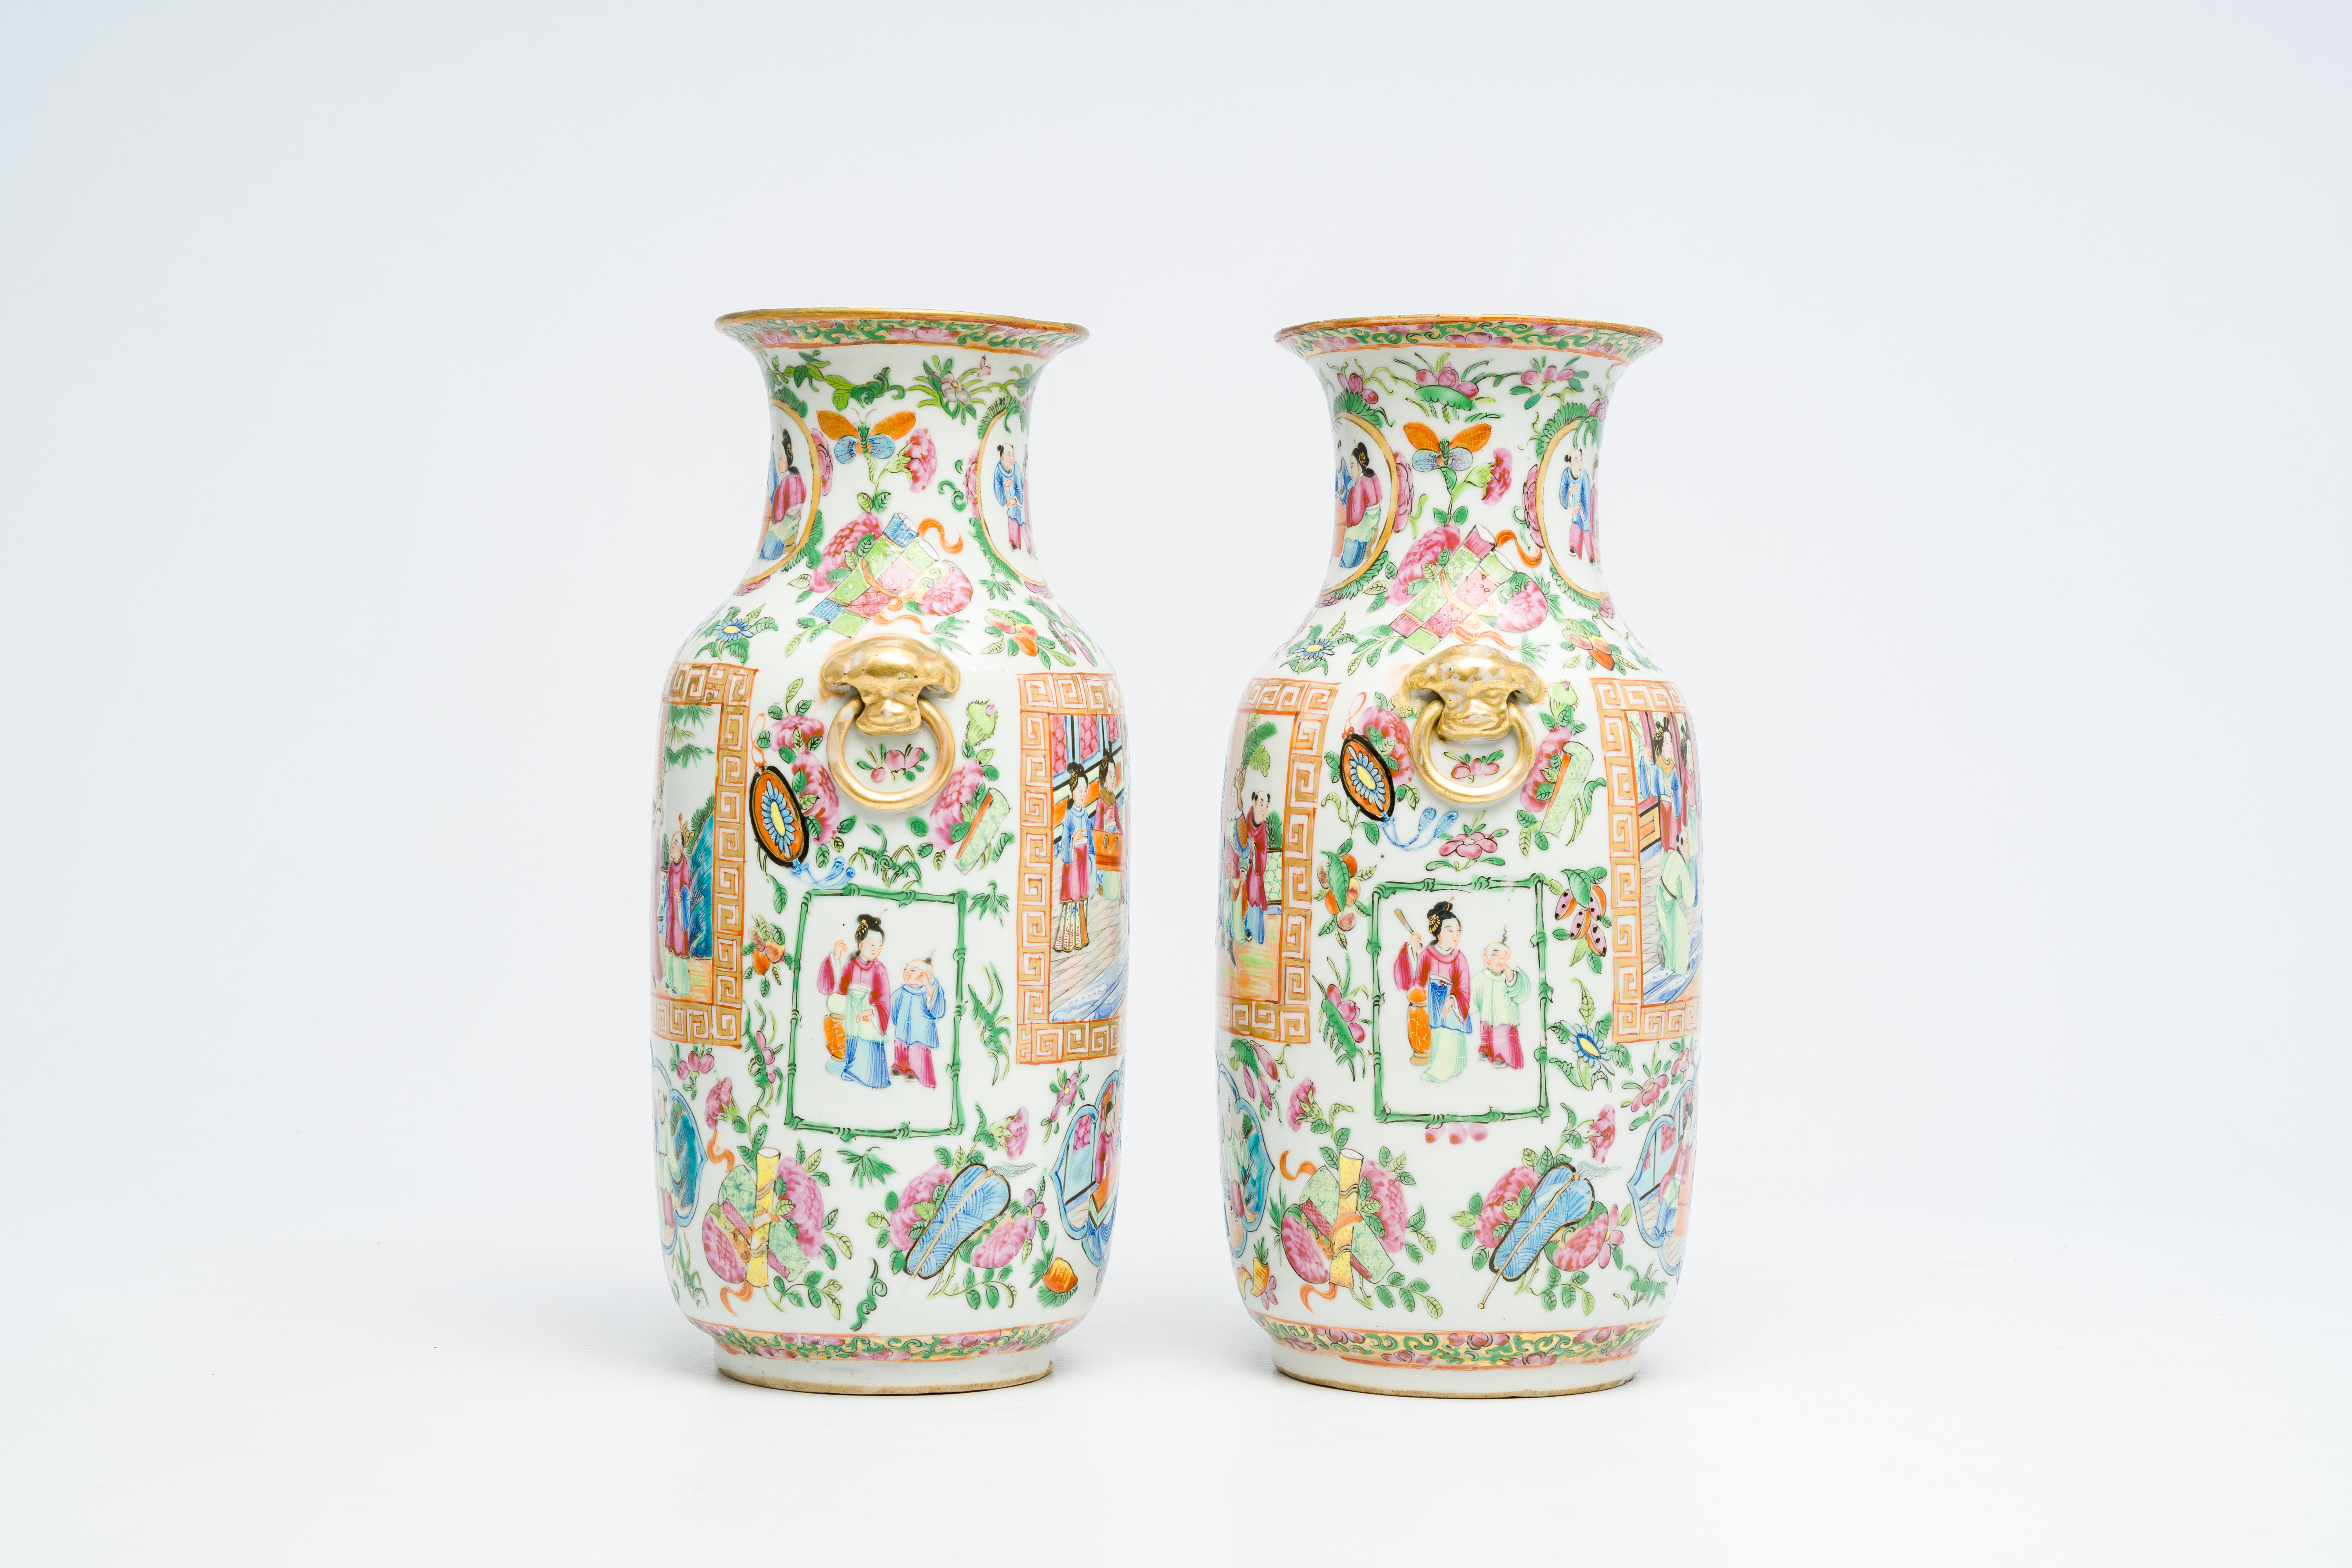 A pair of Chinese Canton famille rose vases with palace scenes and floral design, 19th C. - Image 4 of 6